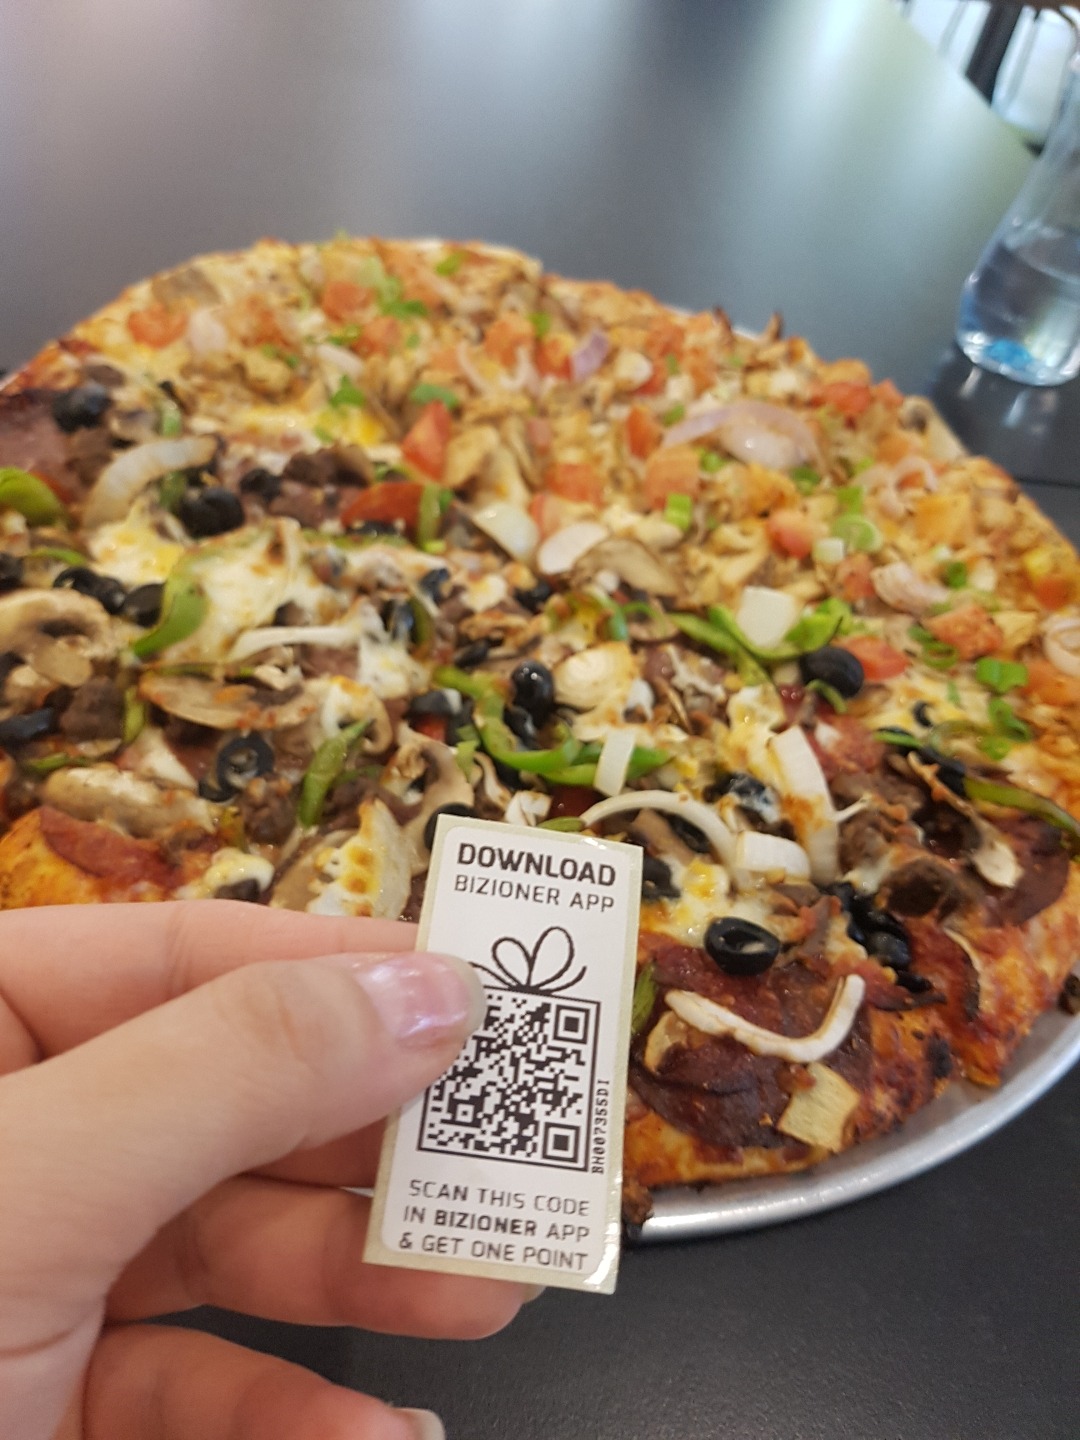 I've got 1 bizio point. 😀 . 
i more point and i will get a free pizza @ Round Table Pizza - Bahrain